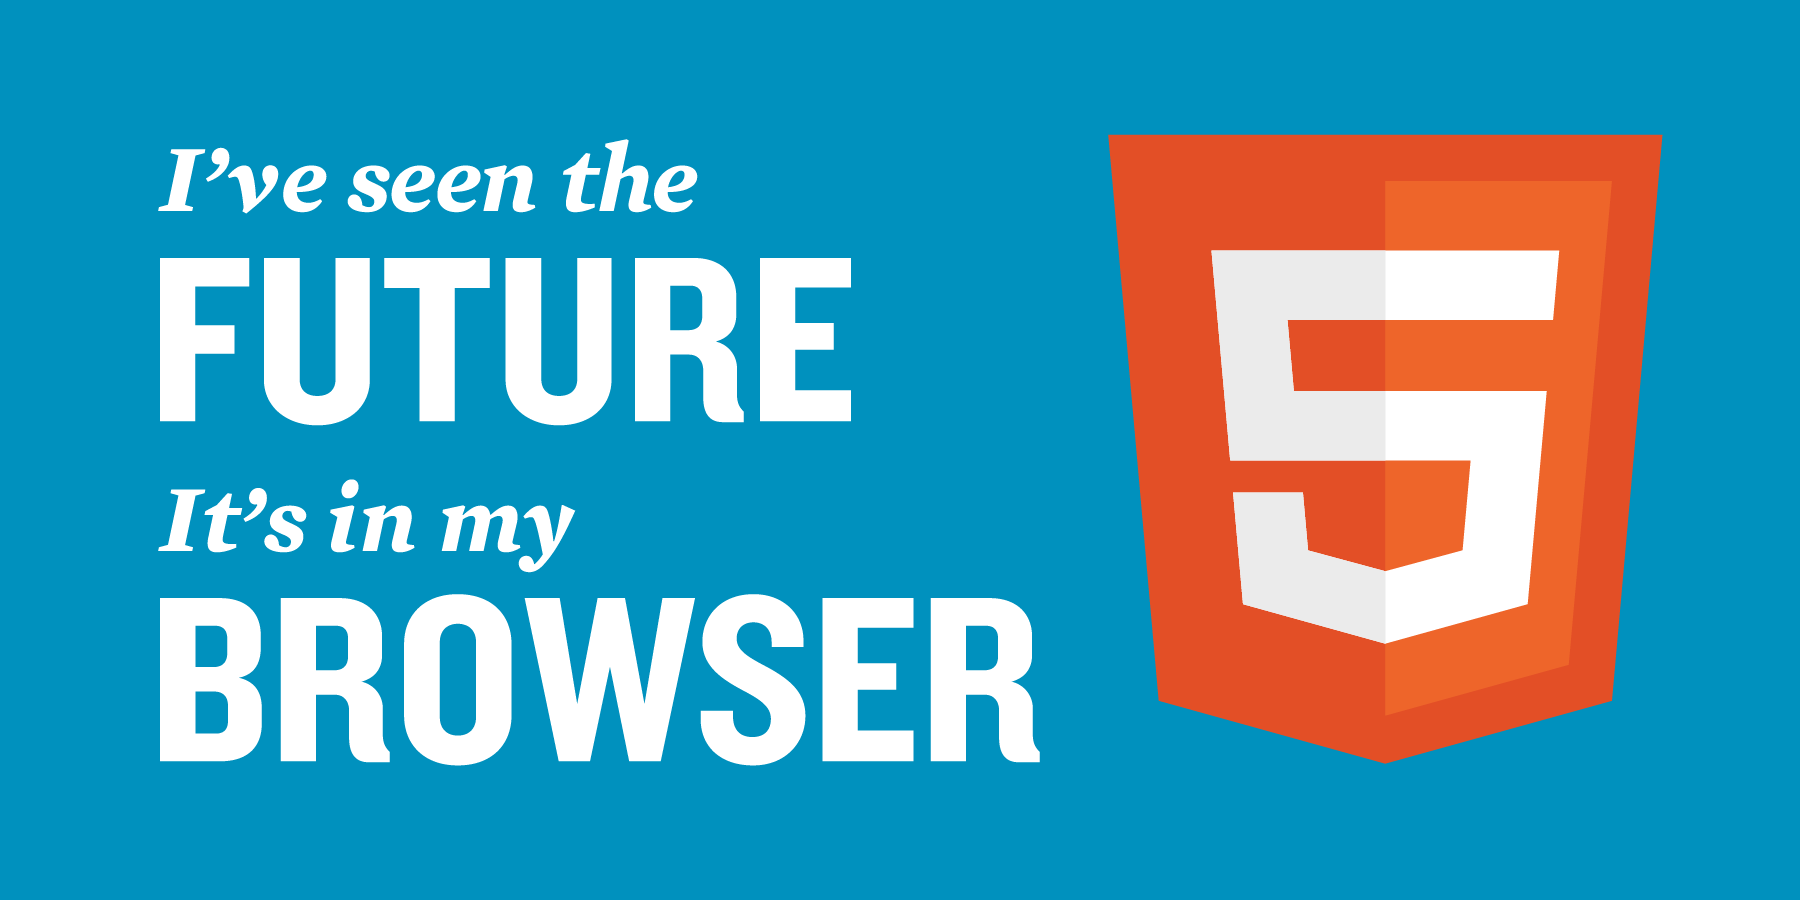 The future is HTML5